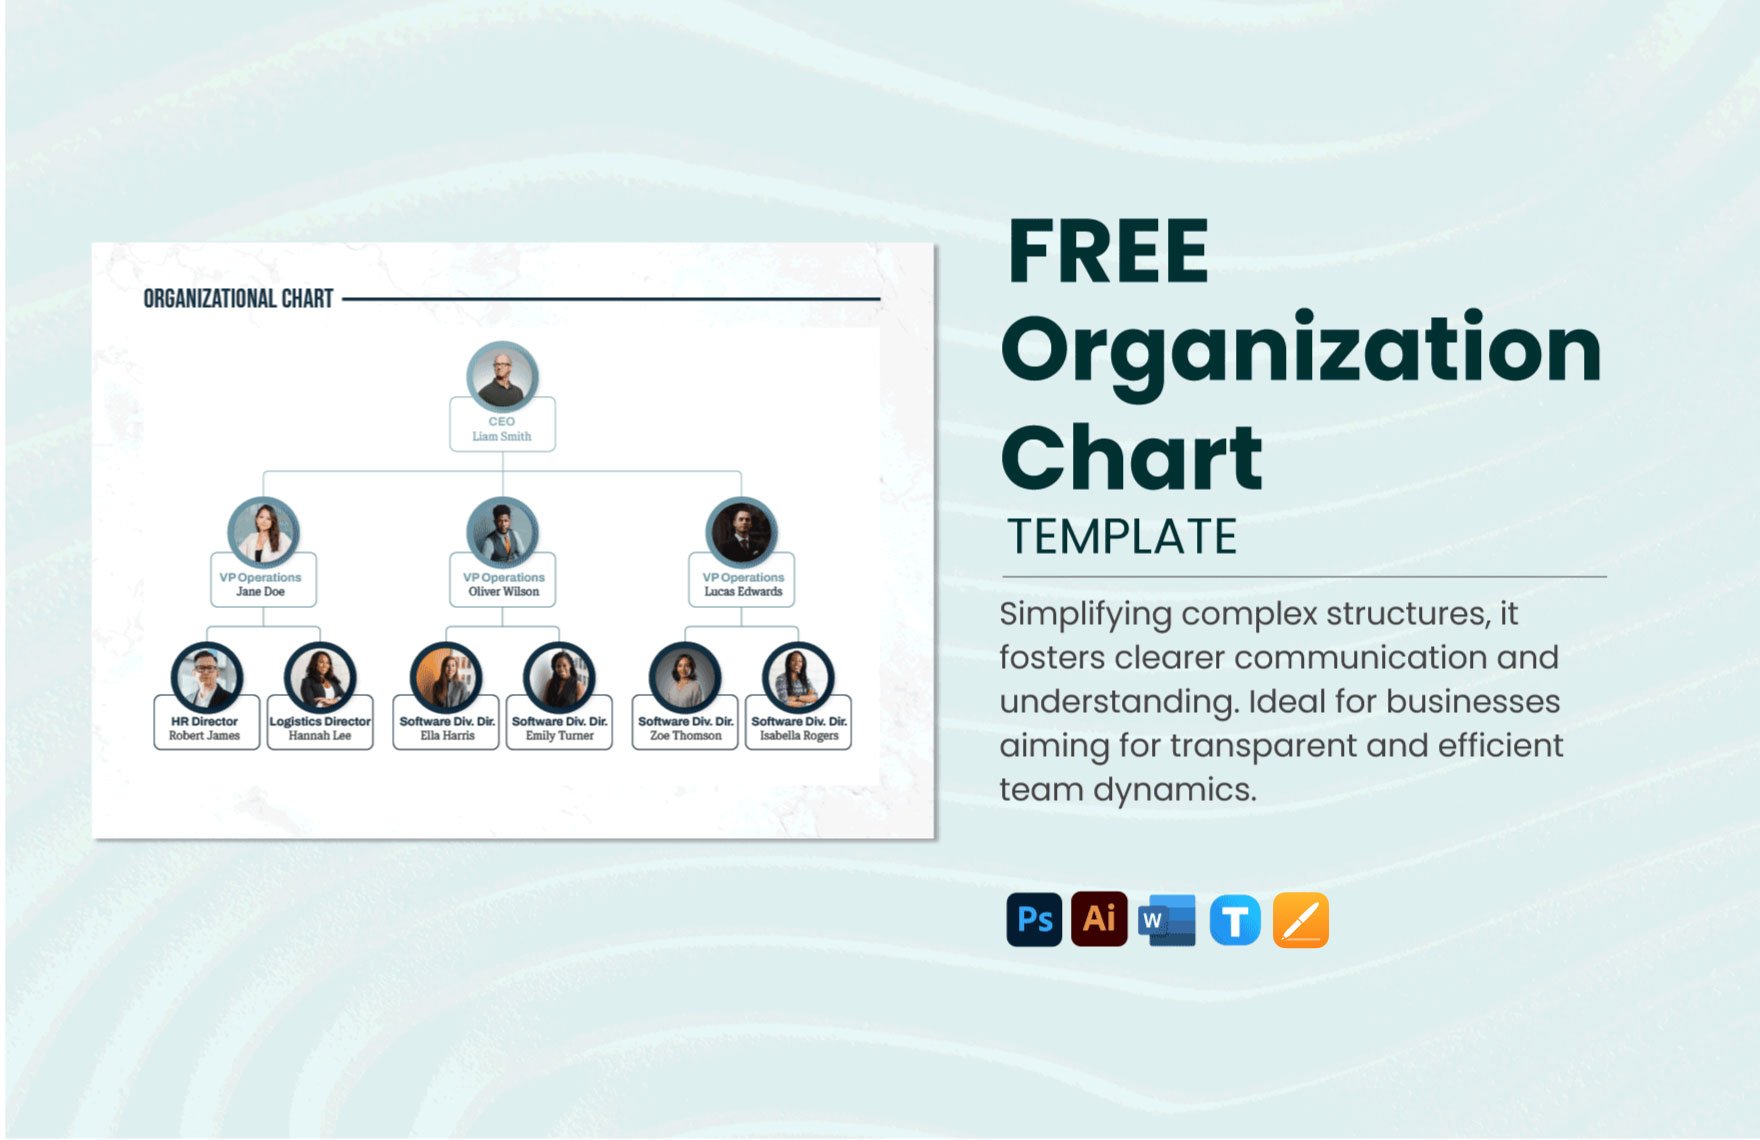 Free Organization Chart Template in Word, Illustrator, PSD, Apple Pages